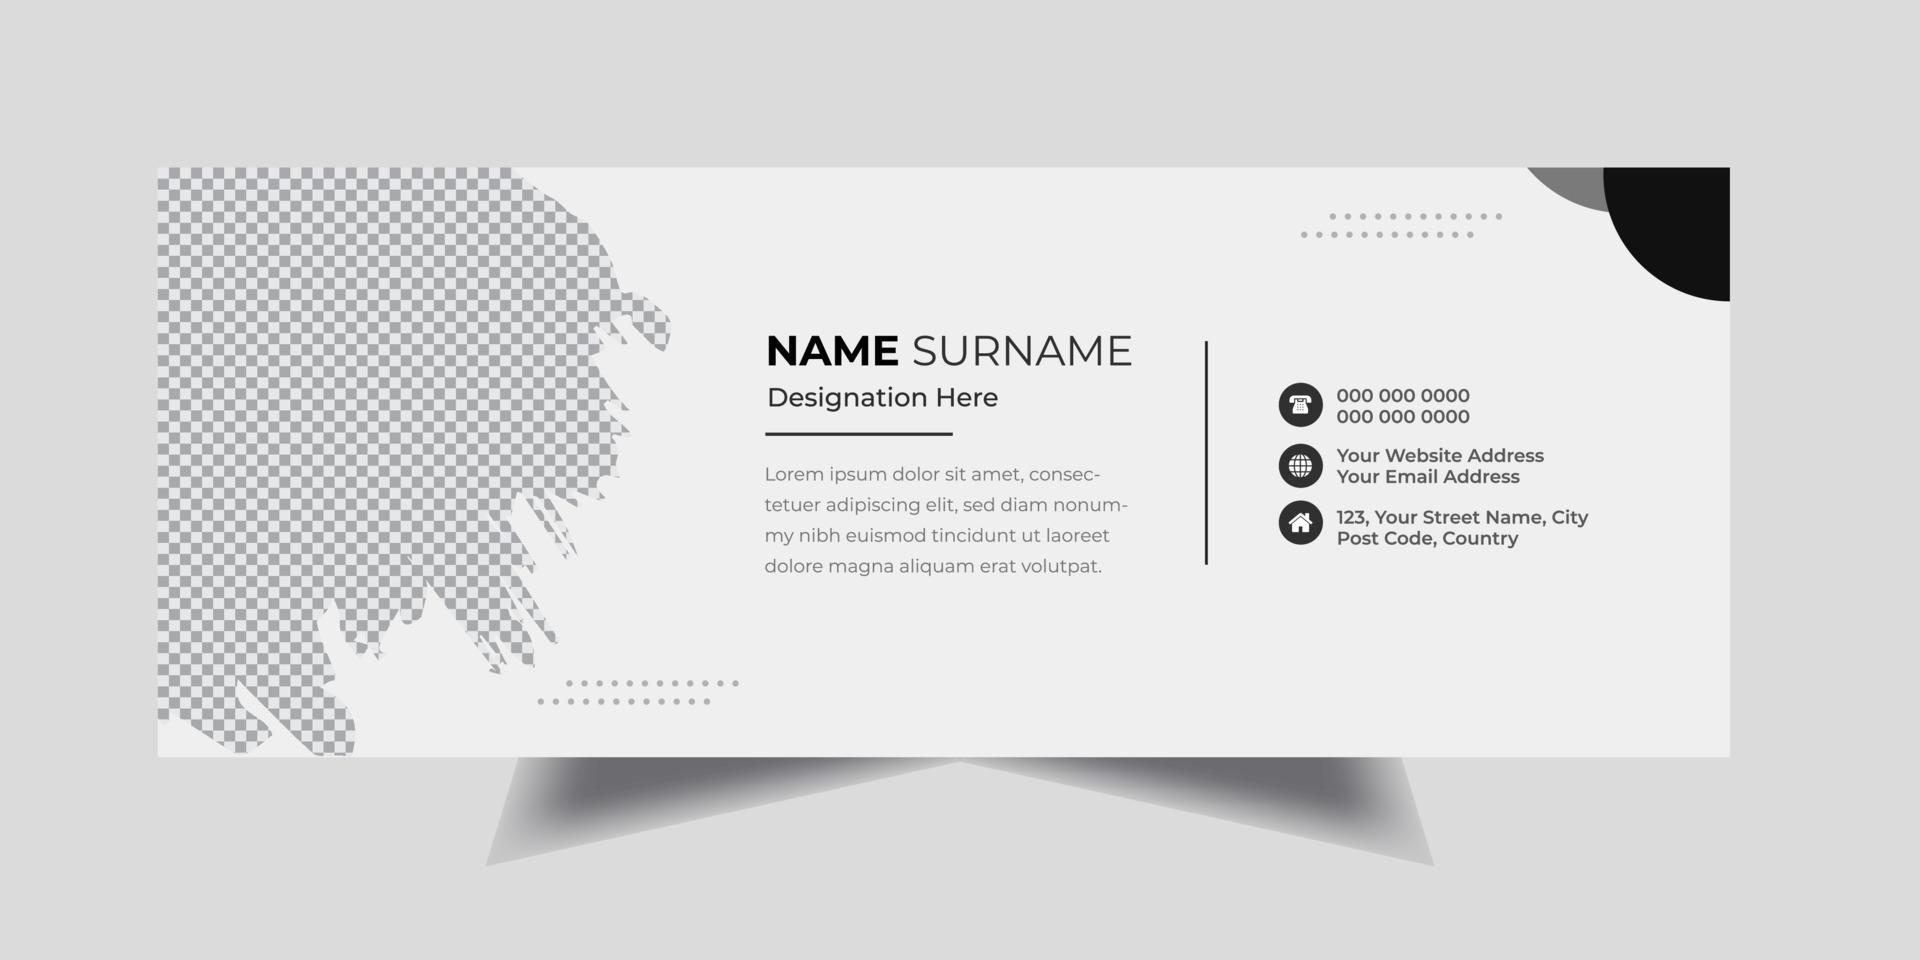 Corporate Business email signature Template Design vector